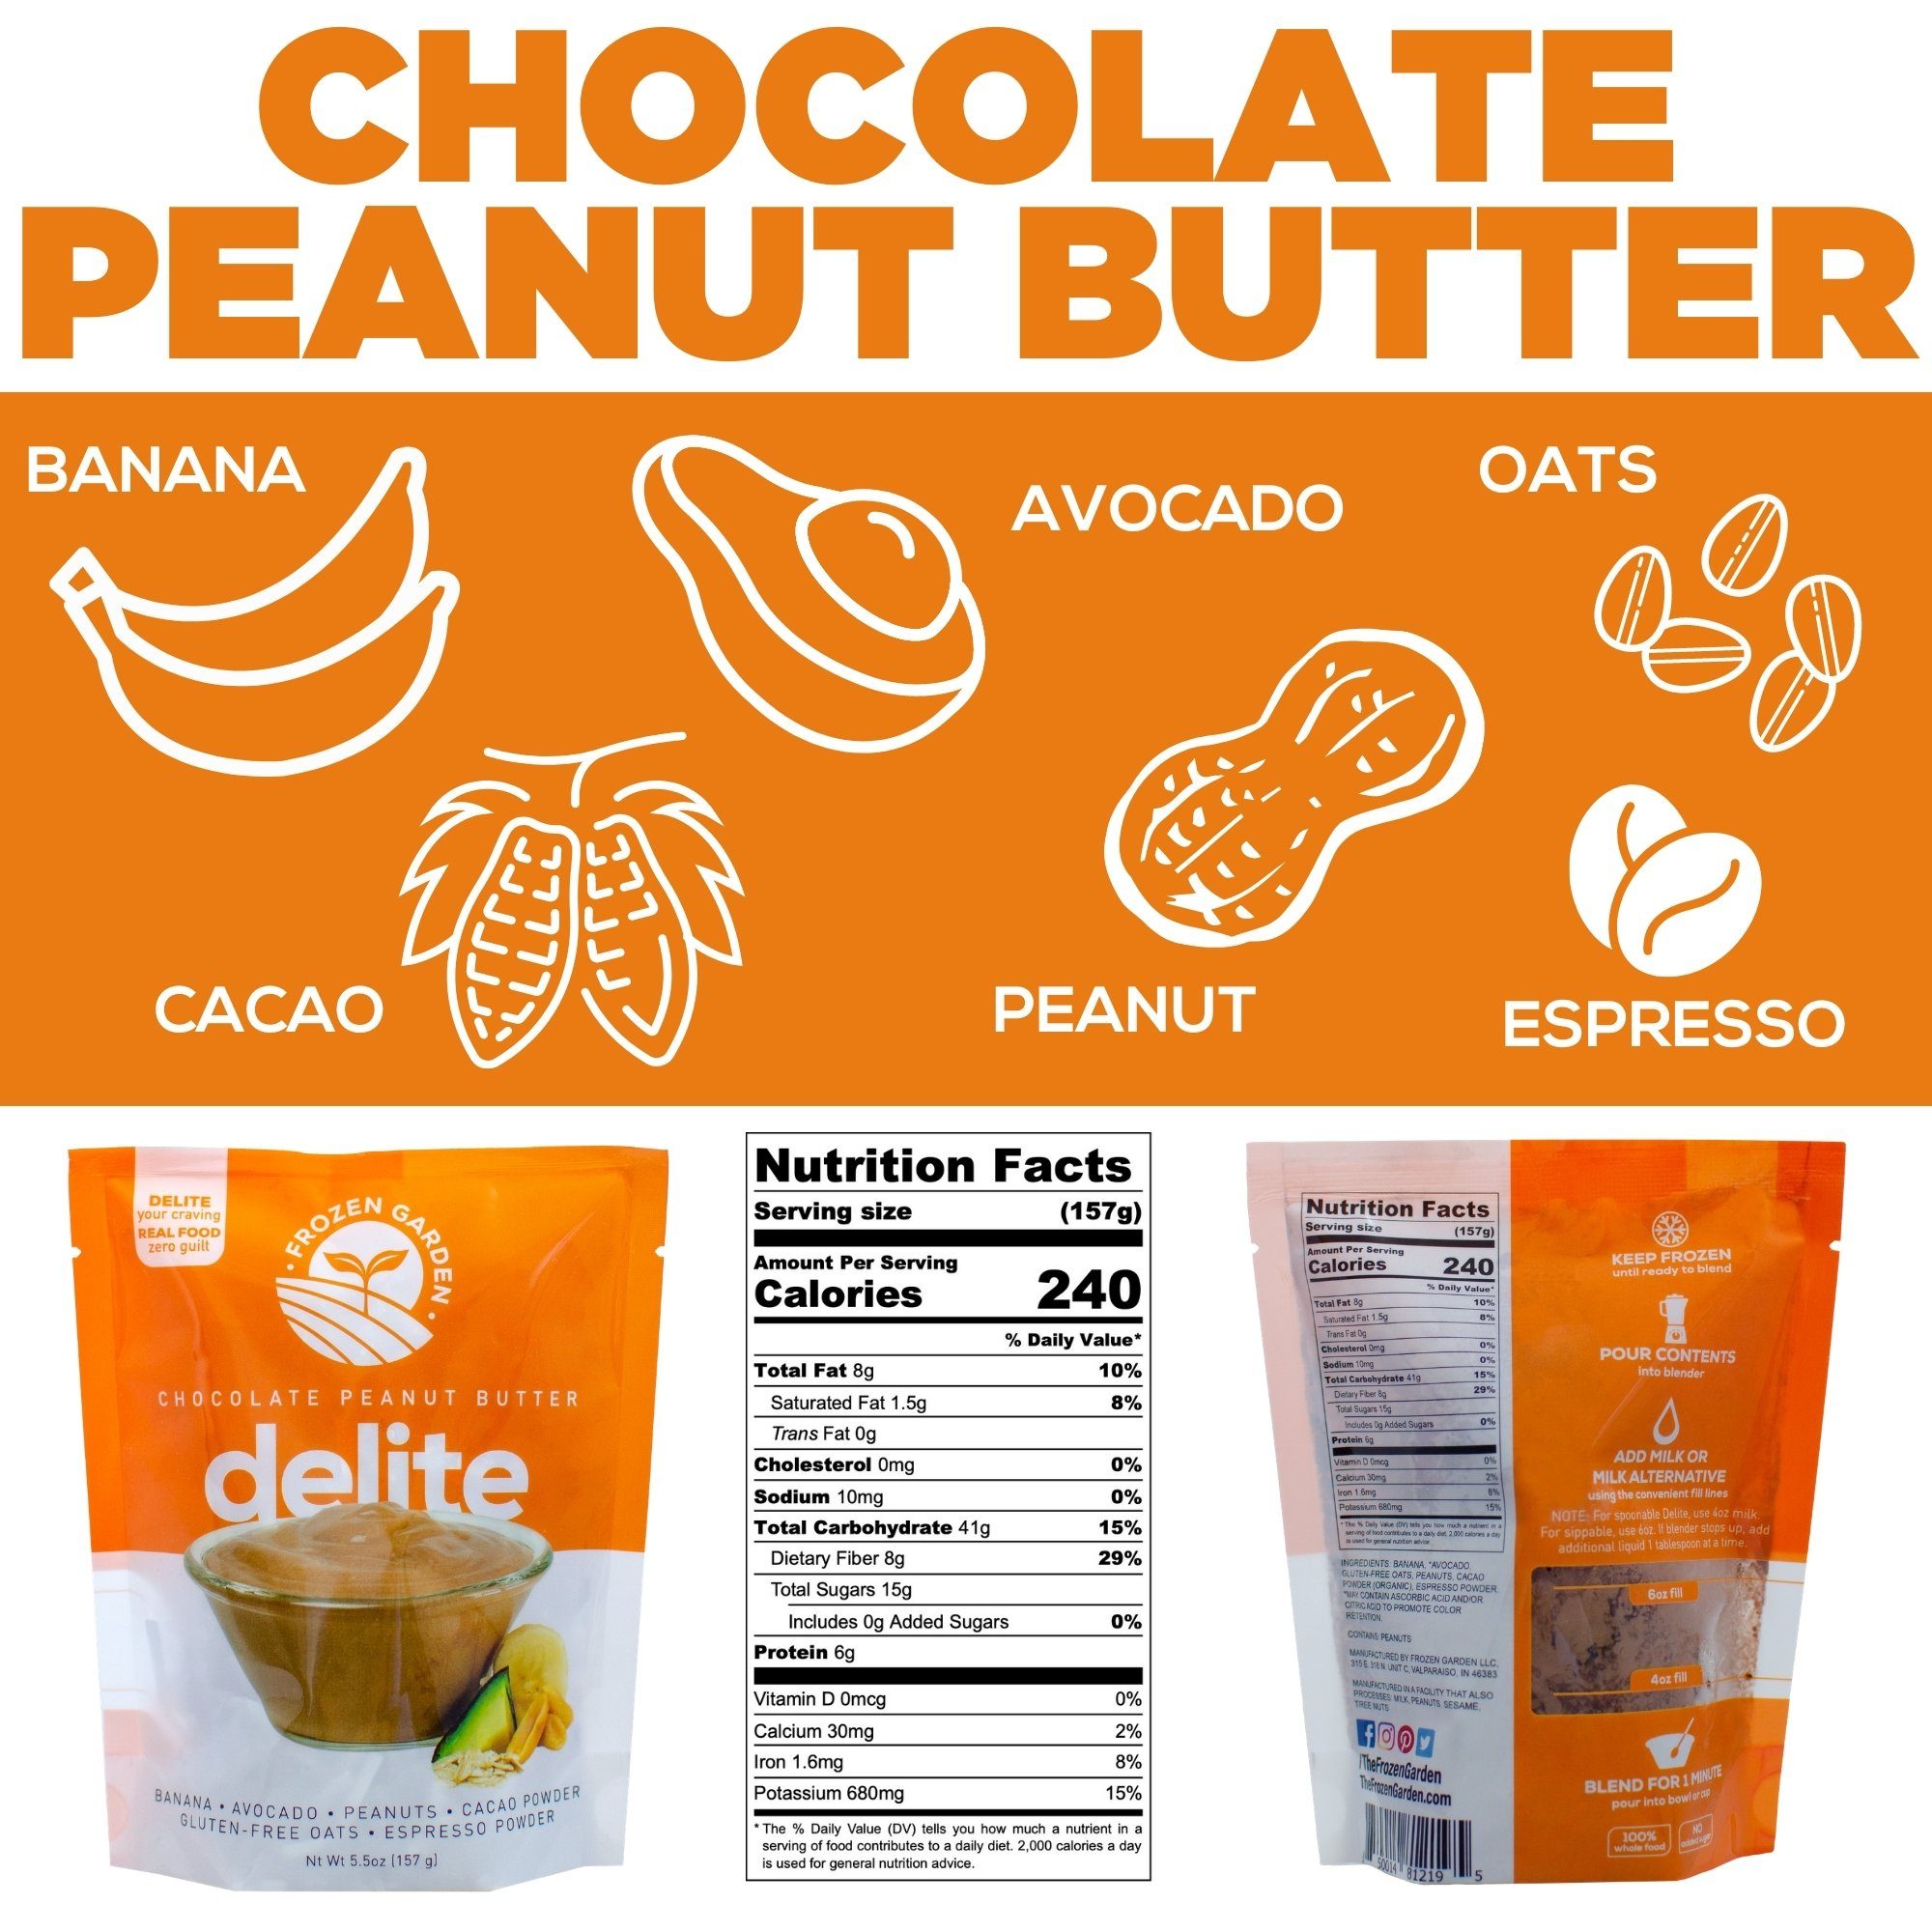 Chocolate Peanut Butter Delite ingredients. doodle drawings of banana, avocado, oats, cacao, peanut, espresso. With Nutrition facts. 240 calories. 8 grams total fat, 1.5 grams saturated fat, 0 grams trans fat, 0 milligrams cholesterol, 10 milligrams cholesterol, 10 milligrams sodium, 41 grams total carbohydrate, 8 grams dietary fiber, 15 grams total sugars, includes 0 grams added sugars, 6 grams protein. 0 micrograms vitamin d, 30 milligrams calcium, 1.6 milligrams iron, 680 milligrams potassium.